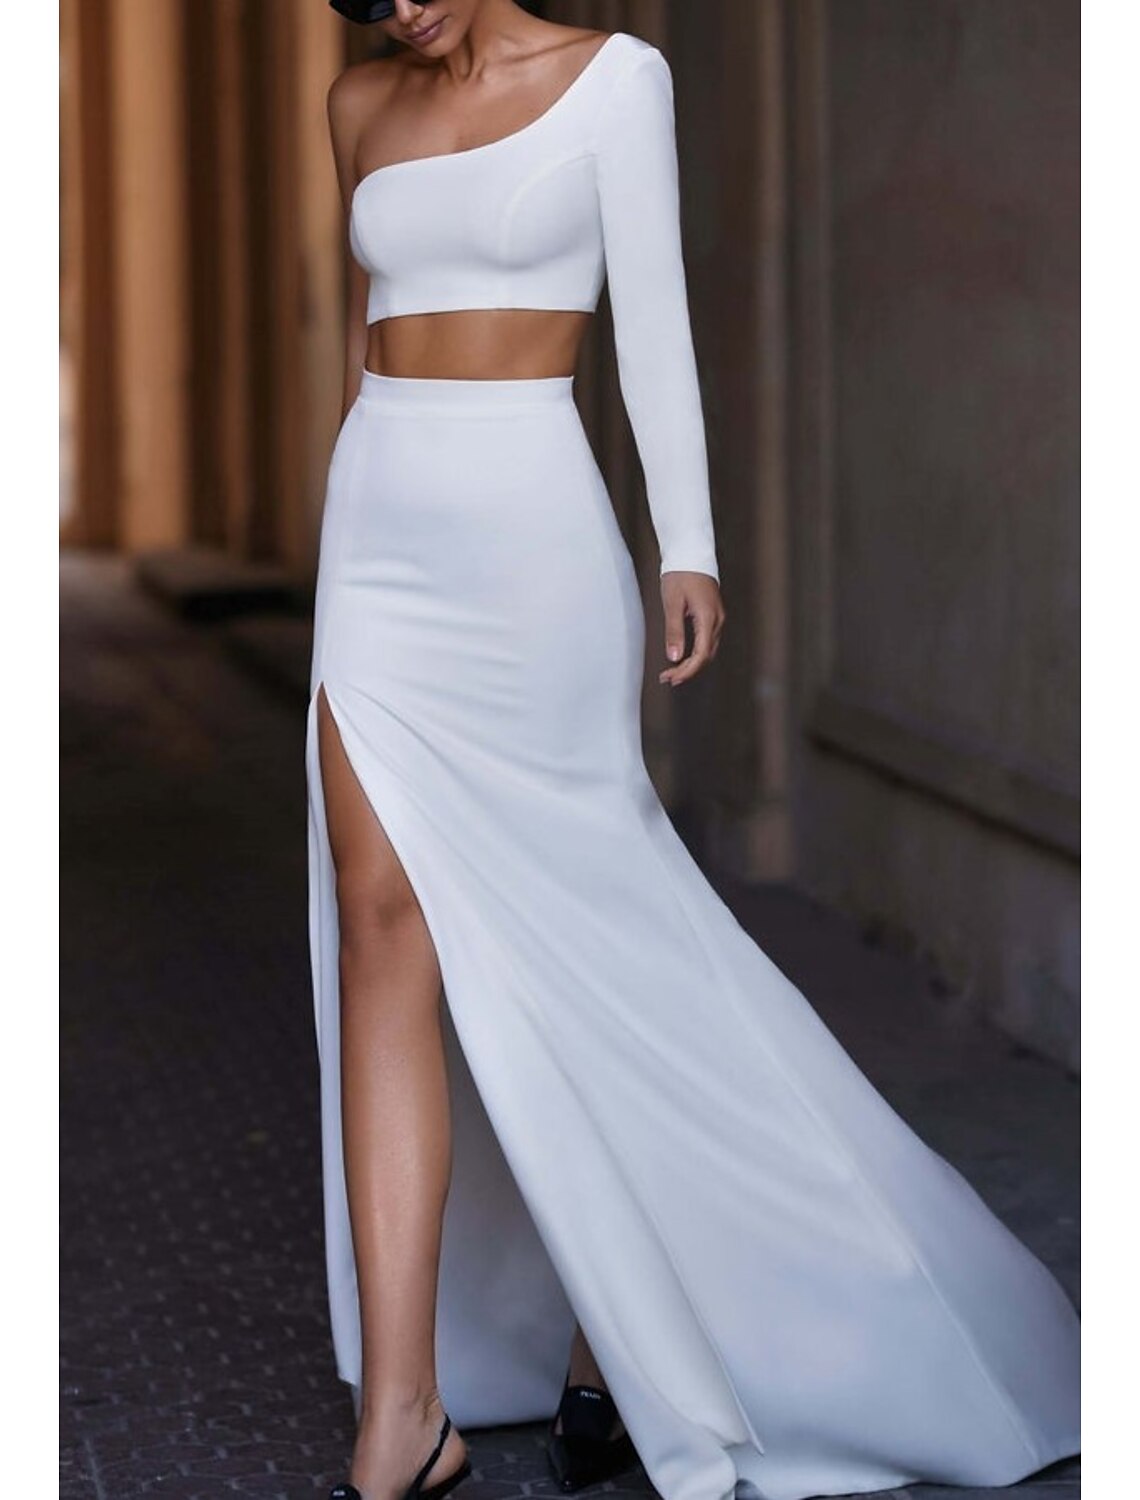 Sheath / Column Minimalist Sexy Prom Birthday Dress One Shoulder Long Sleeve Court Train Satin with Slit Pure Color